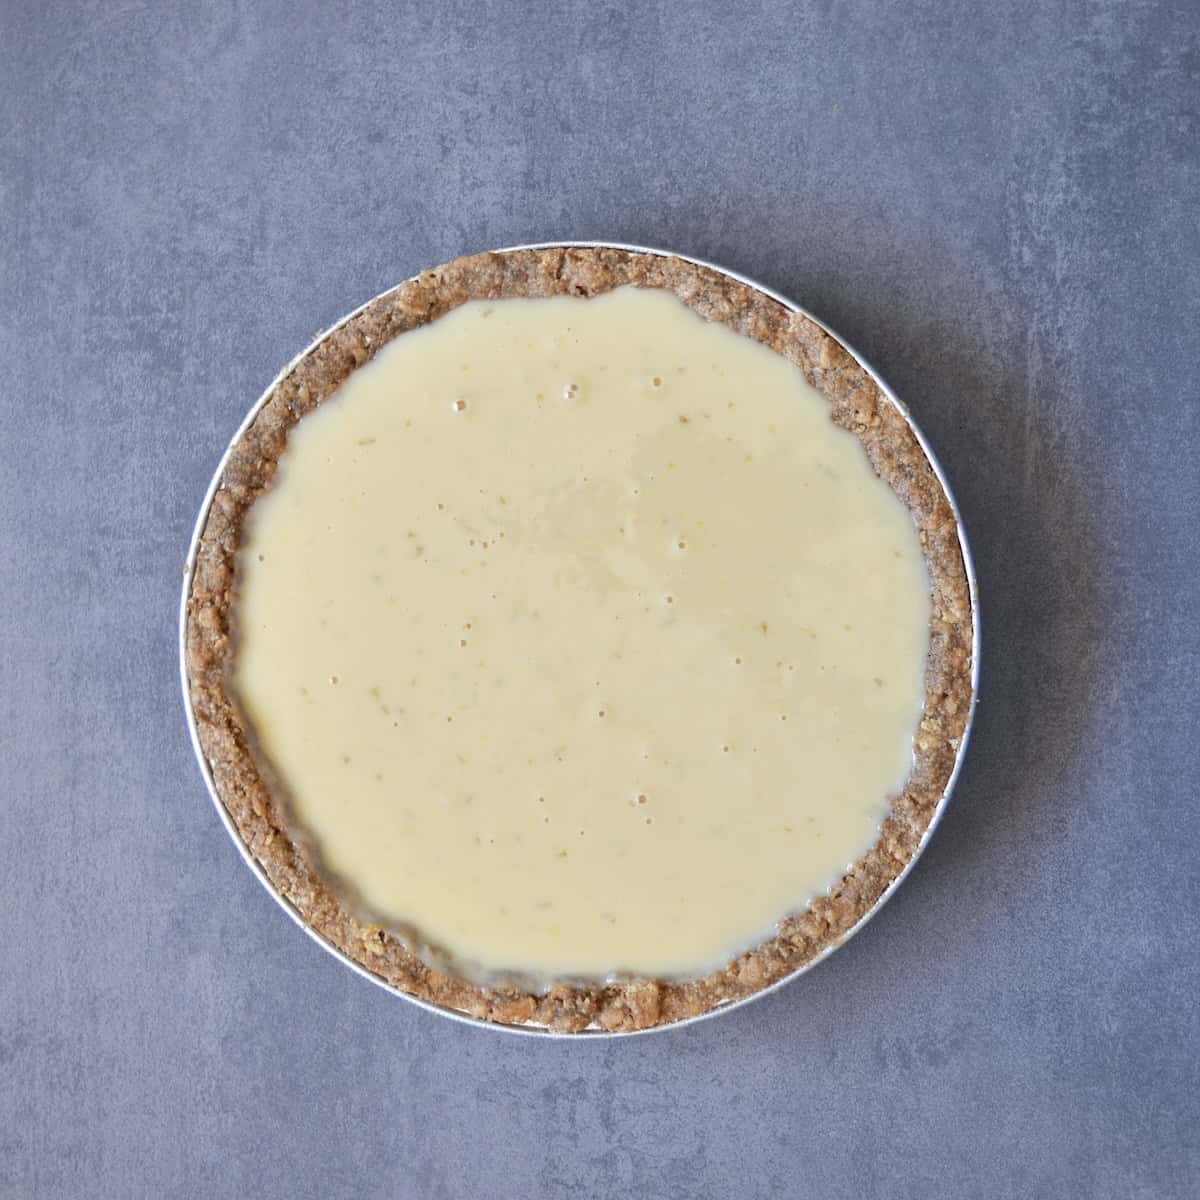 Lime pie before going into the oven